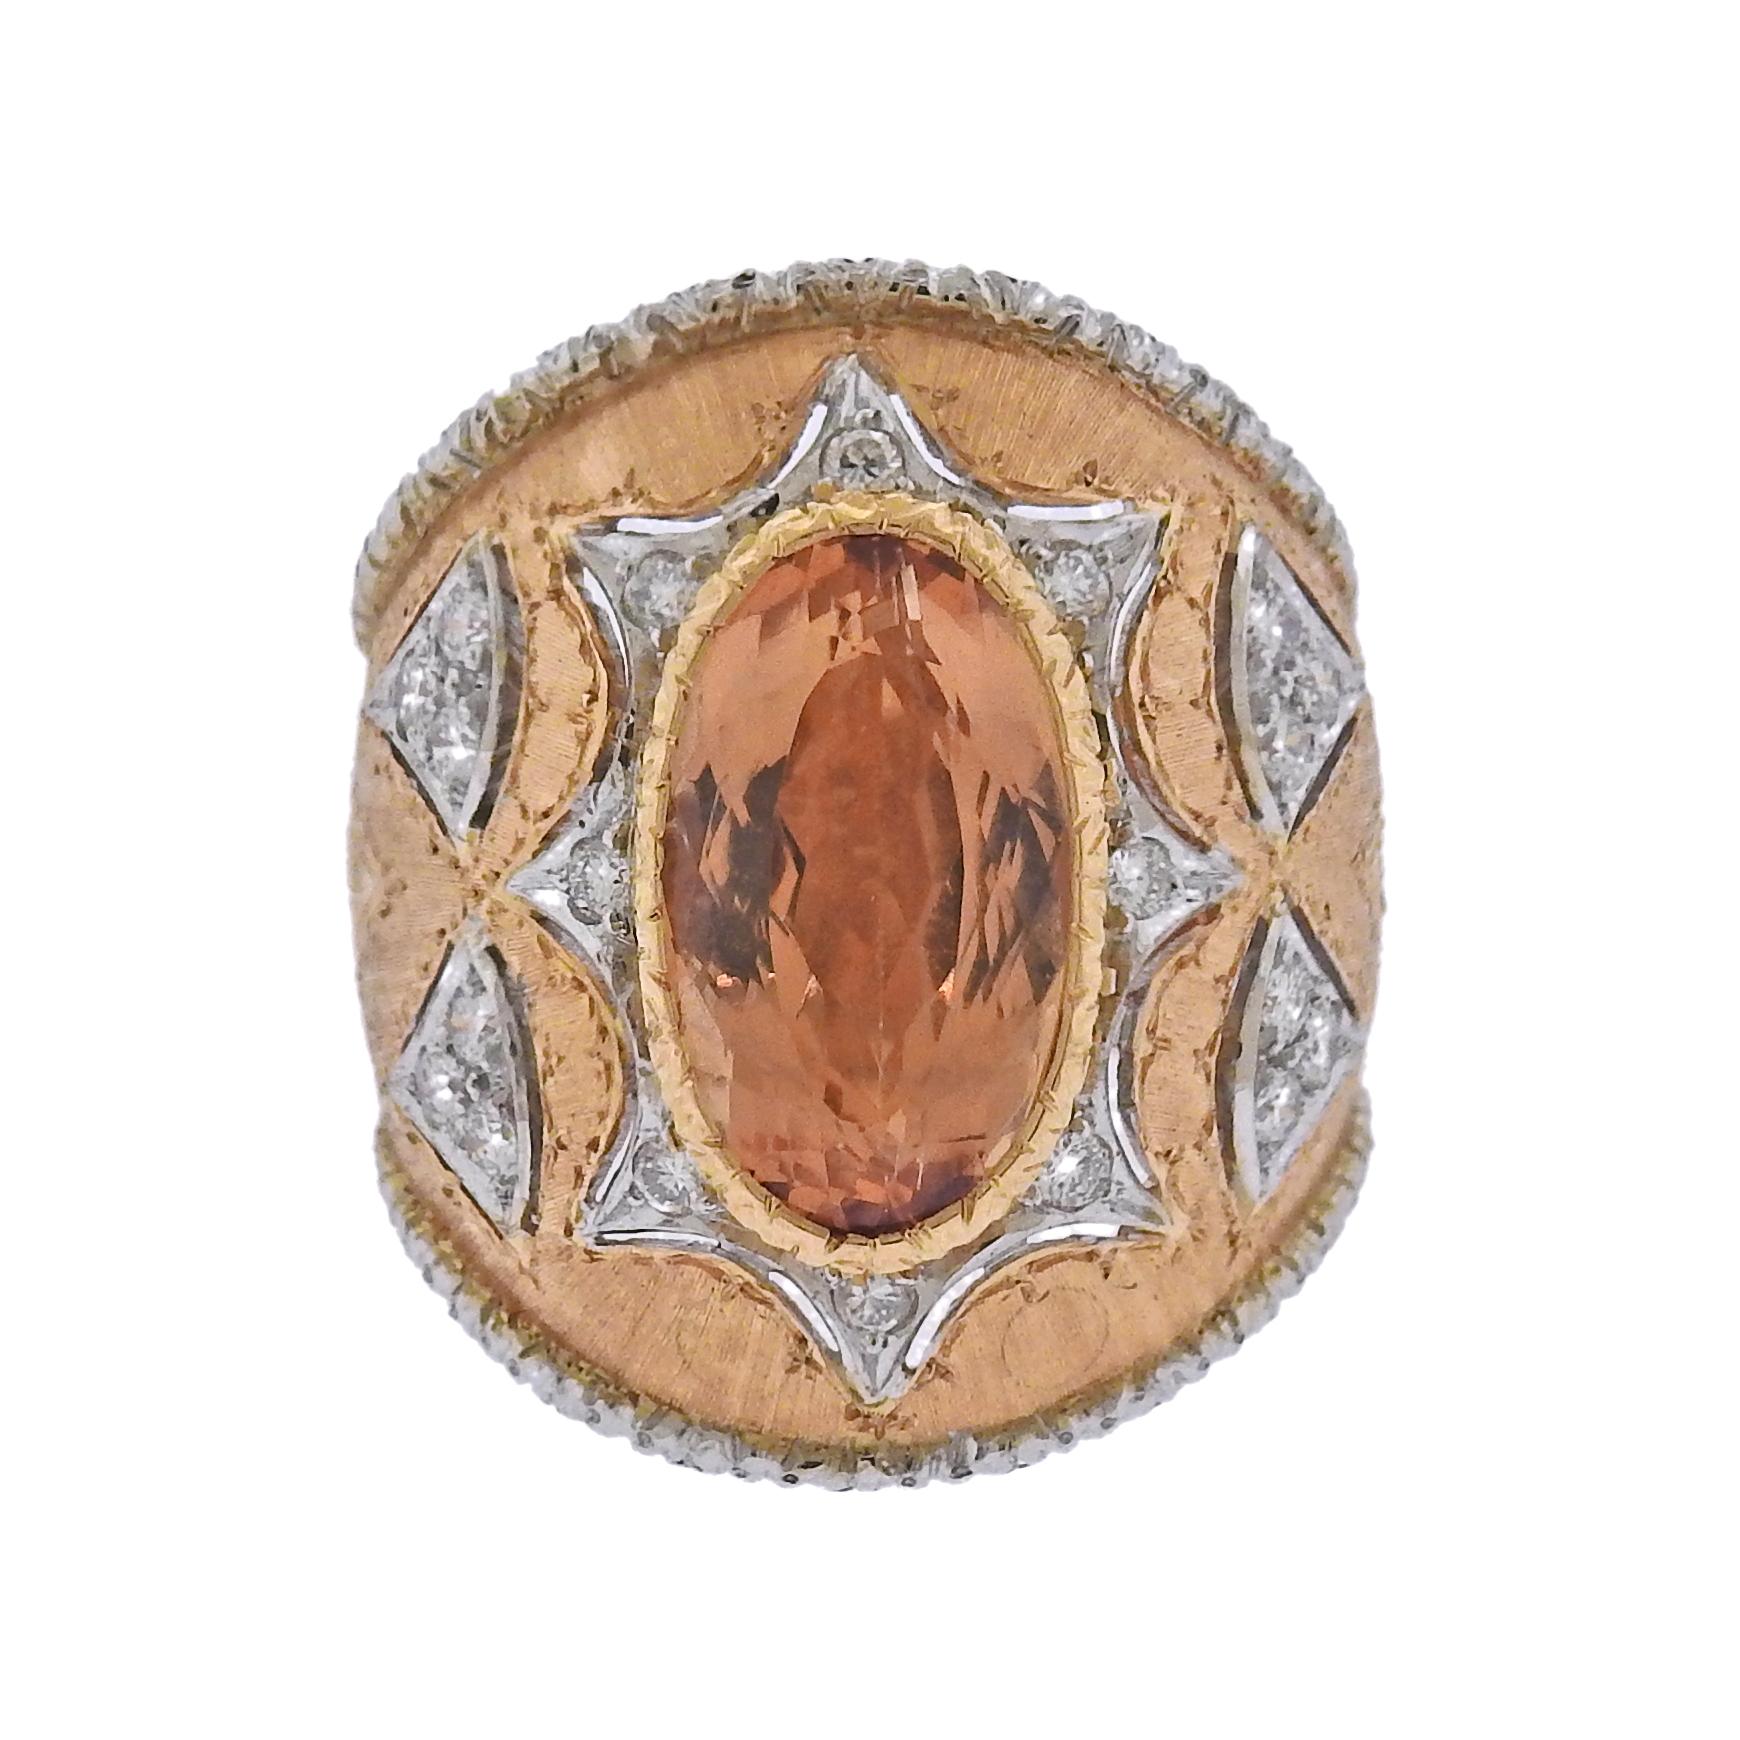 Impressive 18k rose and yellow gold dome ring, crafted by Mario Buccellati , decorated with approx. 8.5 - 9ct padparadscha topaz as a centerpiece, surrounded with approx. 0.44ctw in G/VS diamonds. Ring is a size 6 3/4, ring top is 24mm wide. Marked